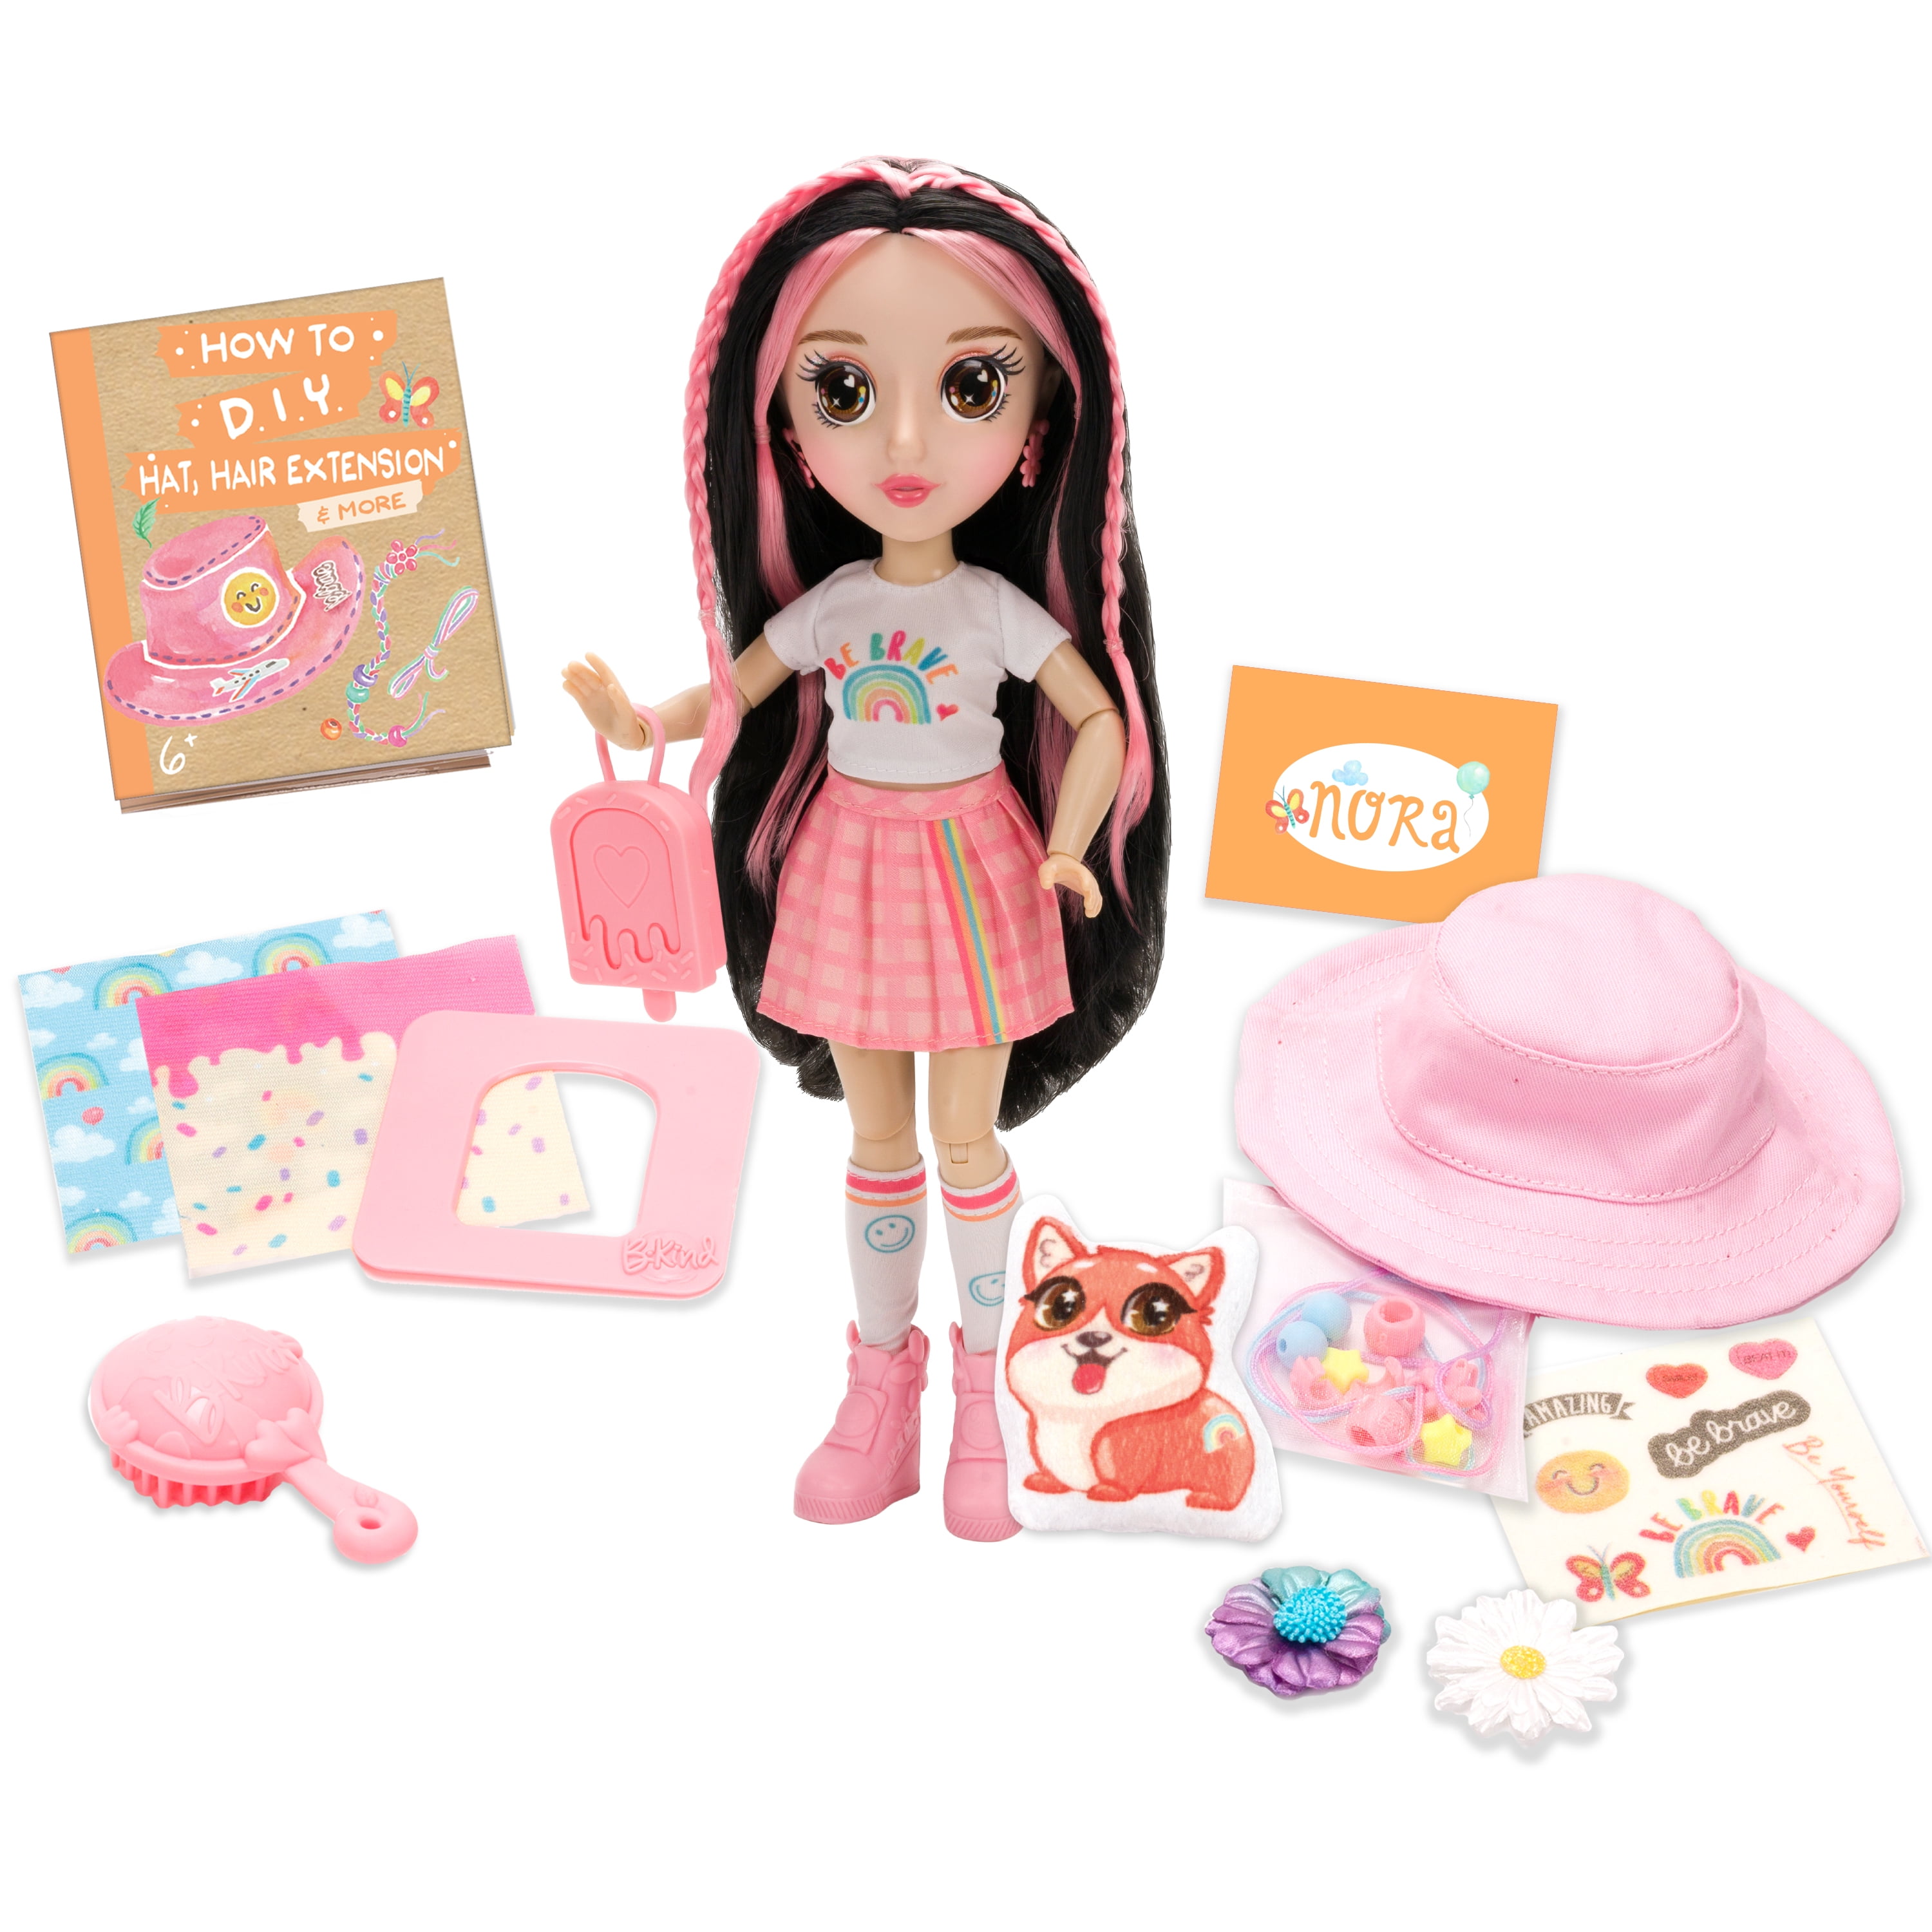 Reverse Hover Father fage BeKind: Nora Eco-Friendly Fashion Doll with DIY Play, Ages Child -  Walmart.com